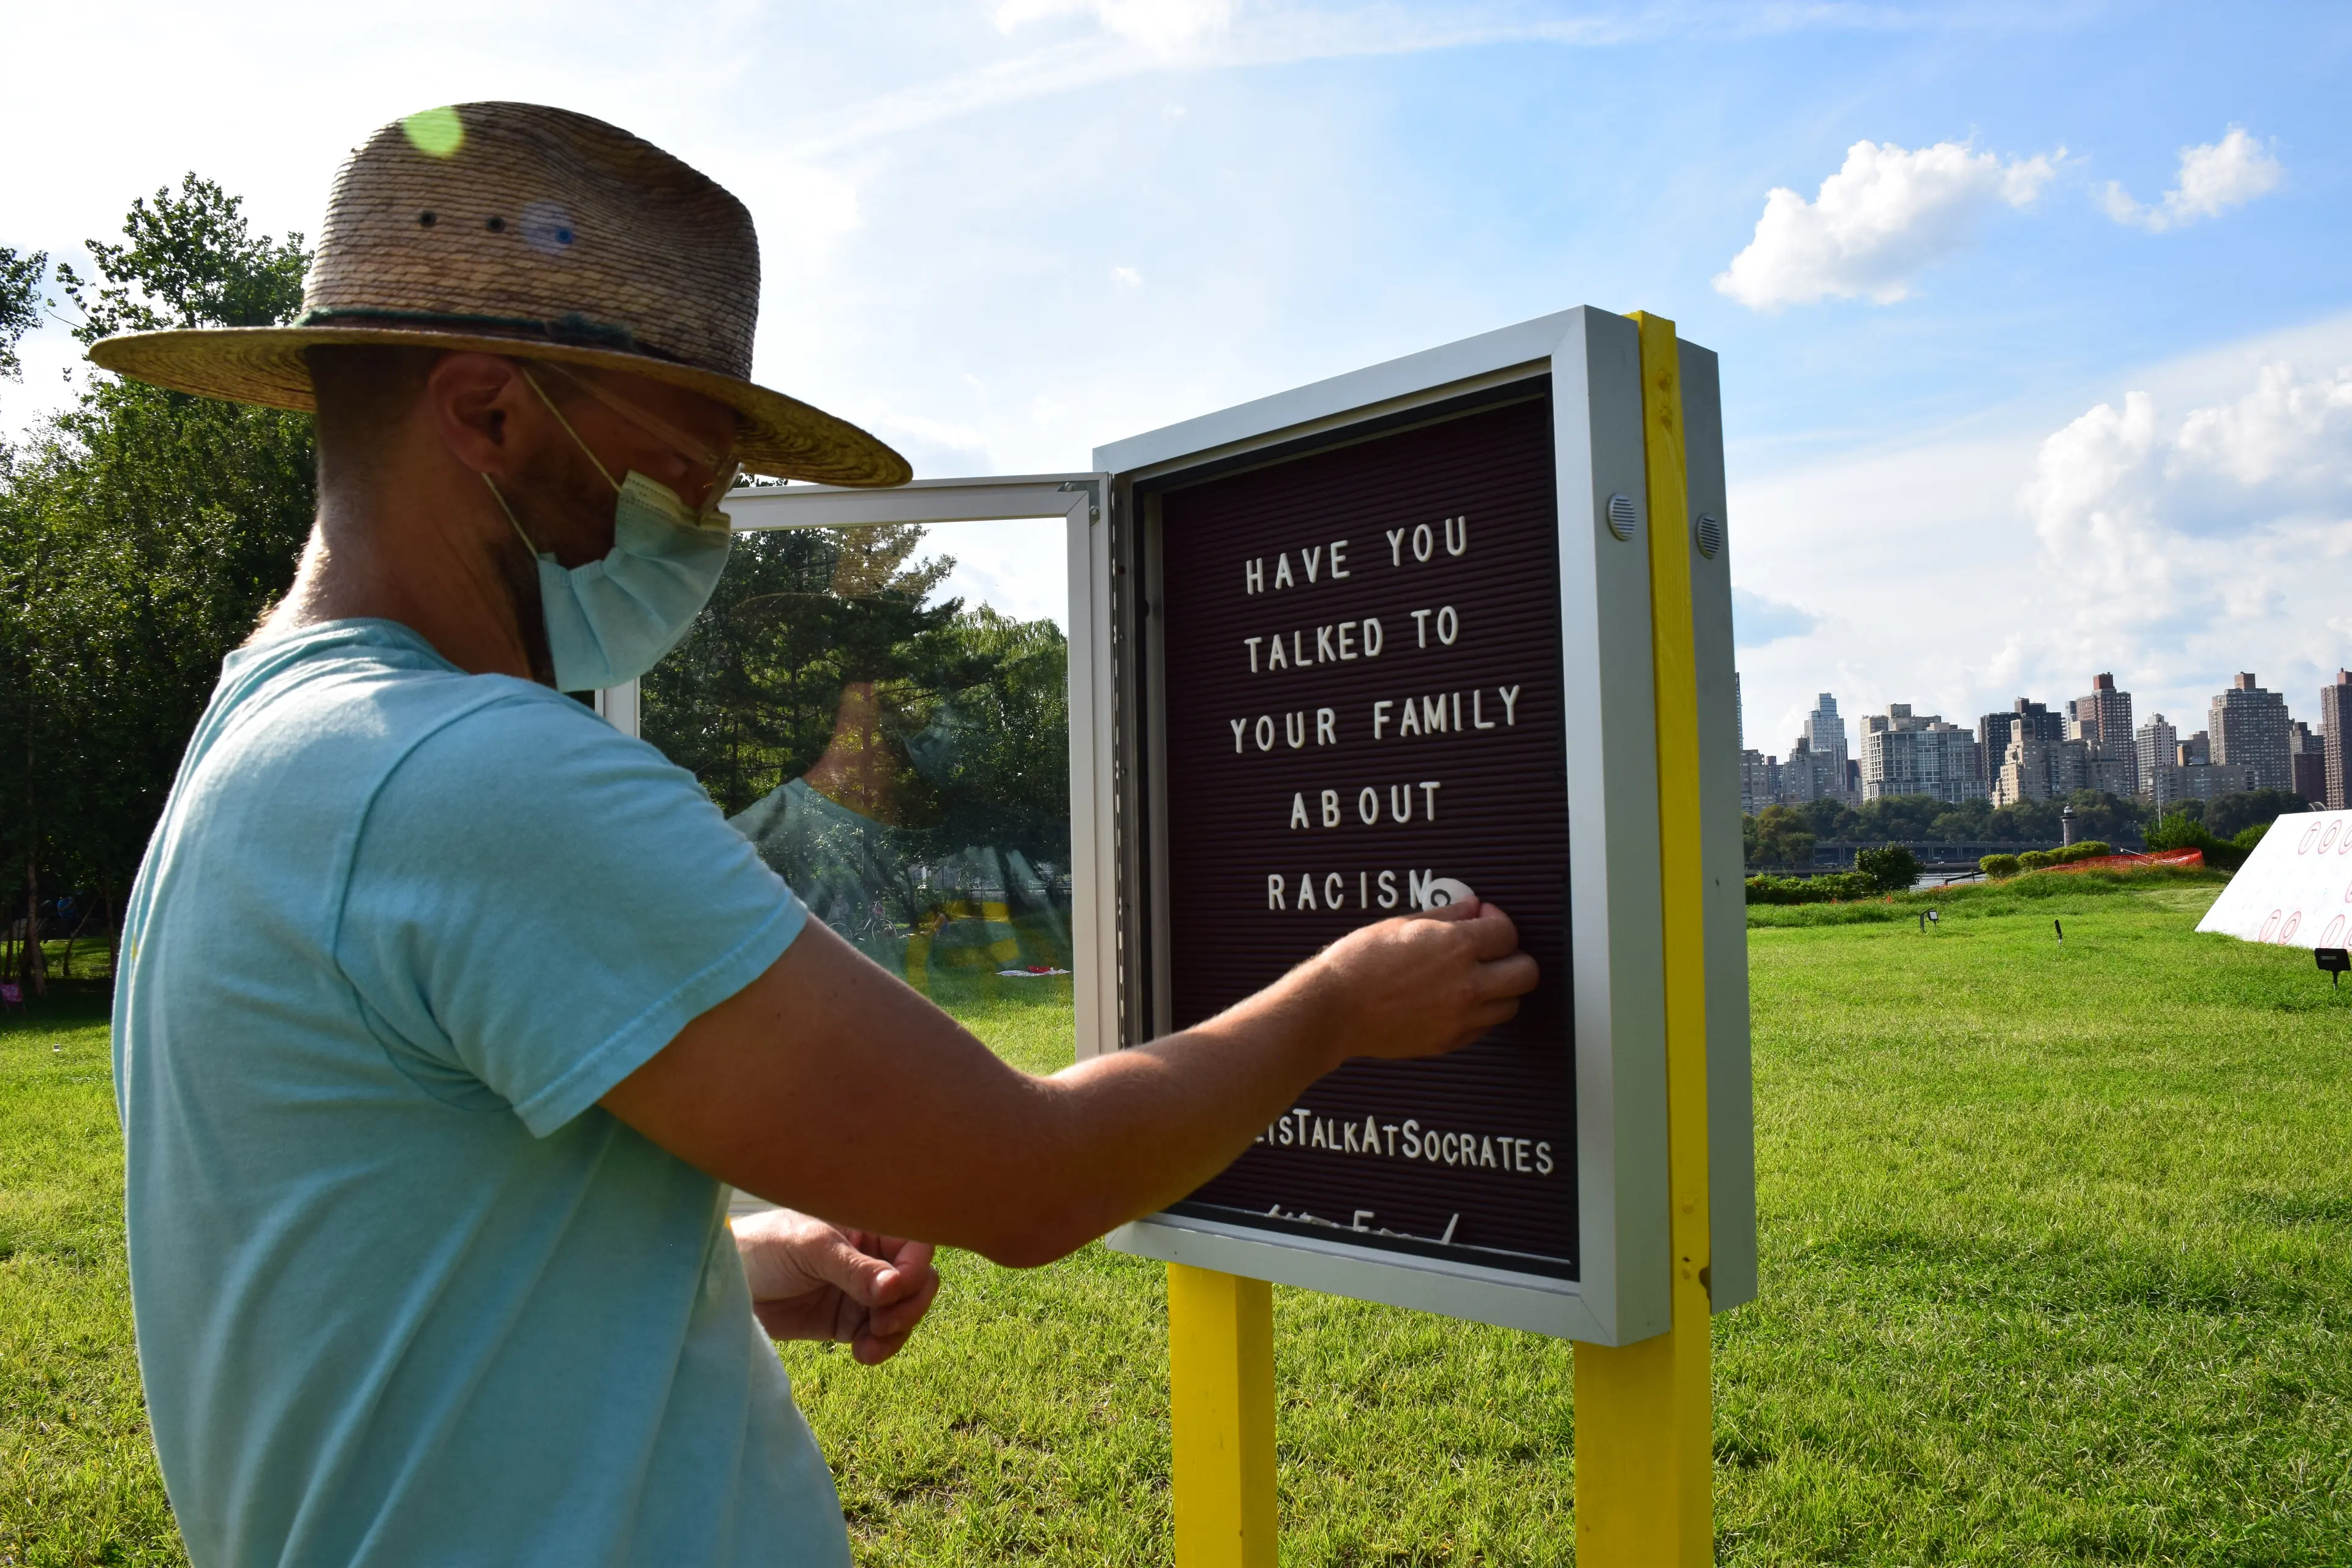 Photo of Doug wearing straw hat and covid mask arranging letters on a sign that says "Have you talked to your family about racism"